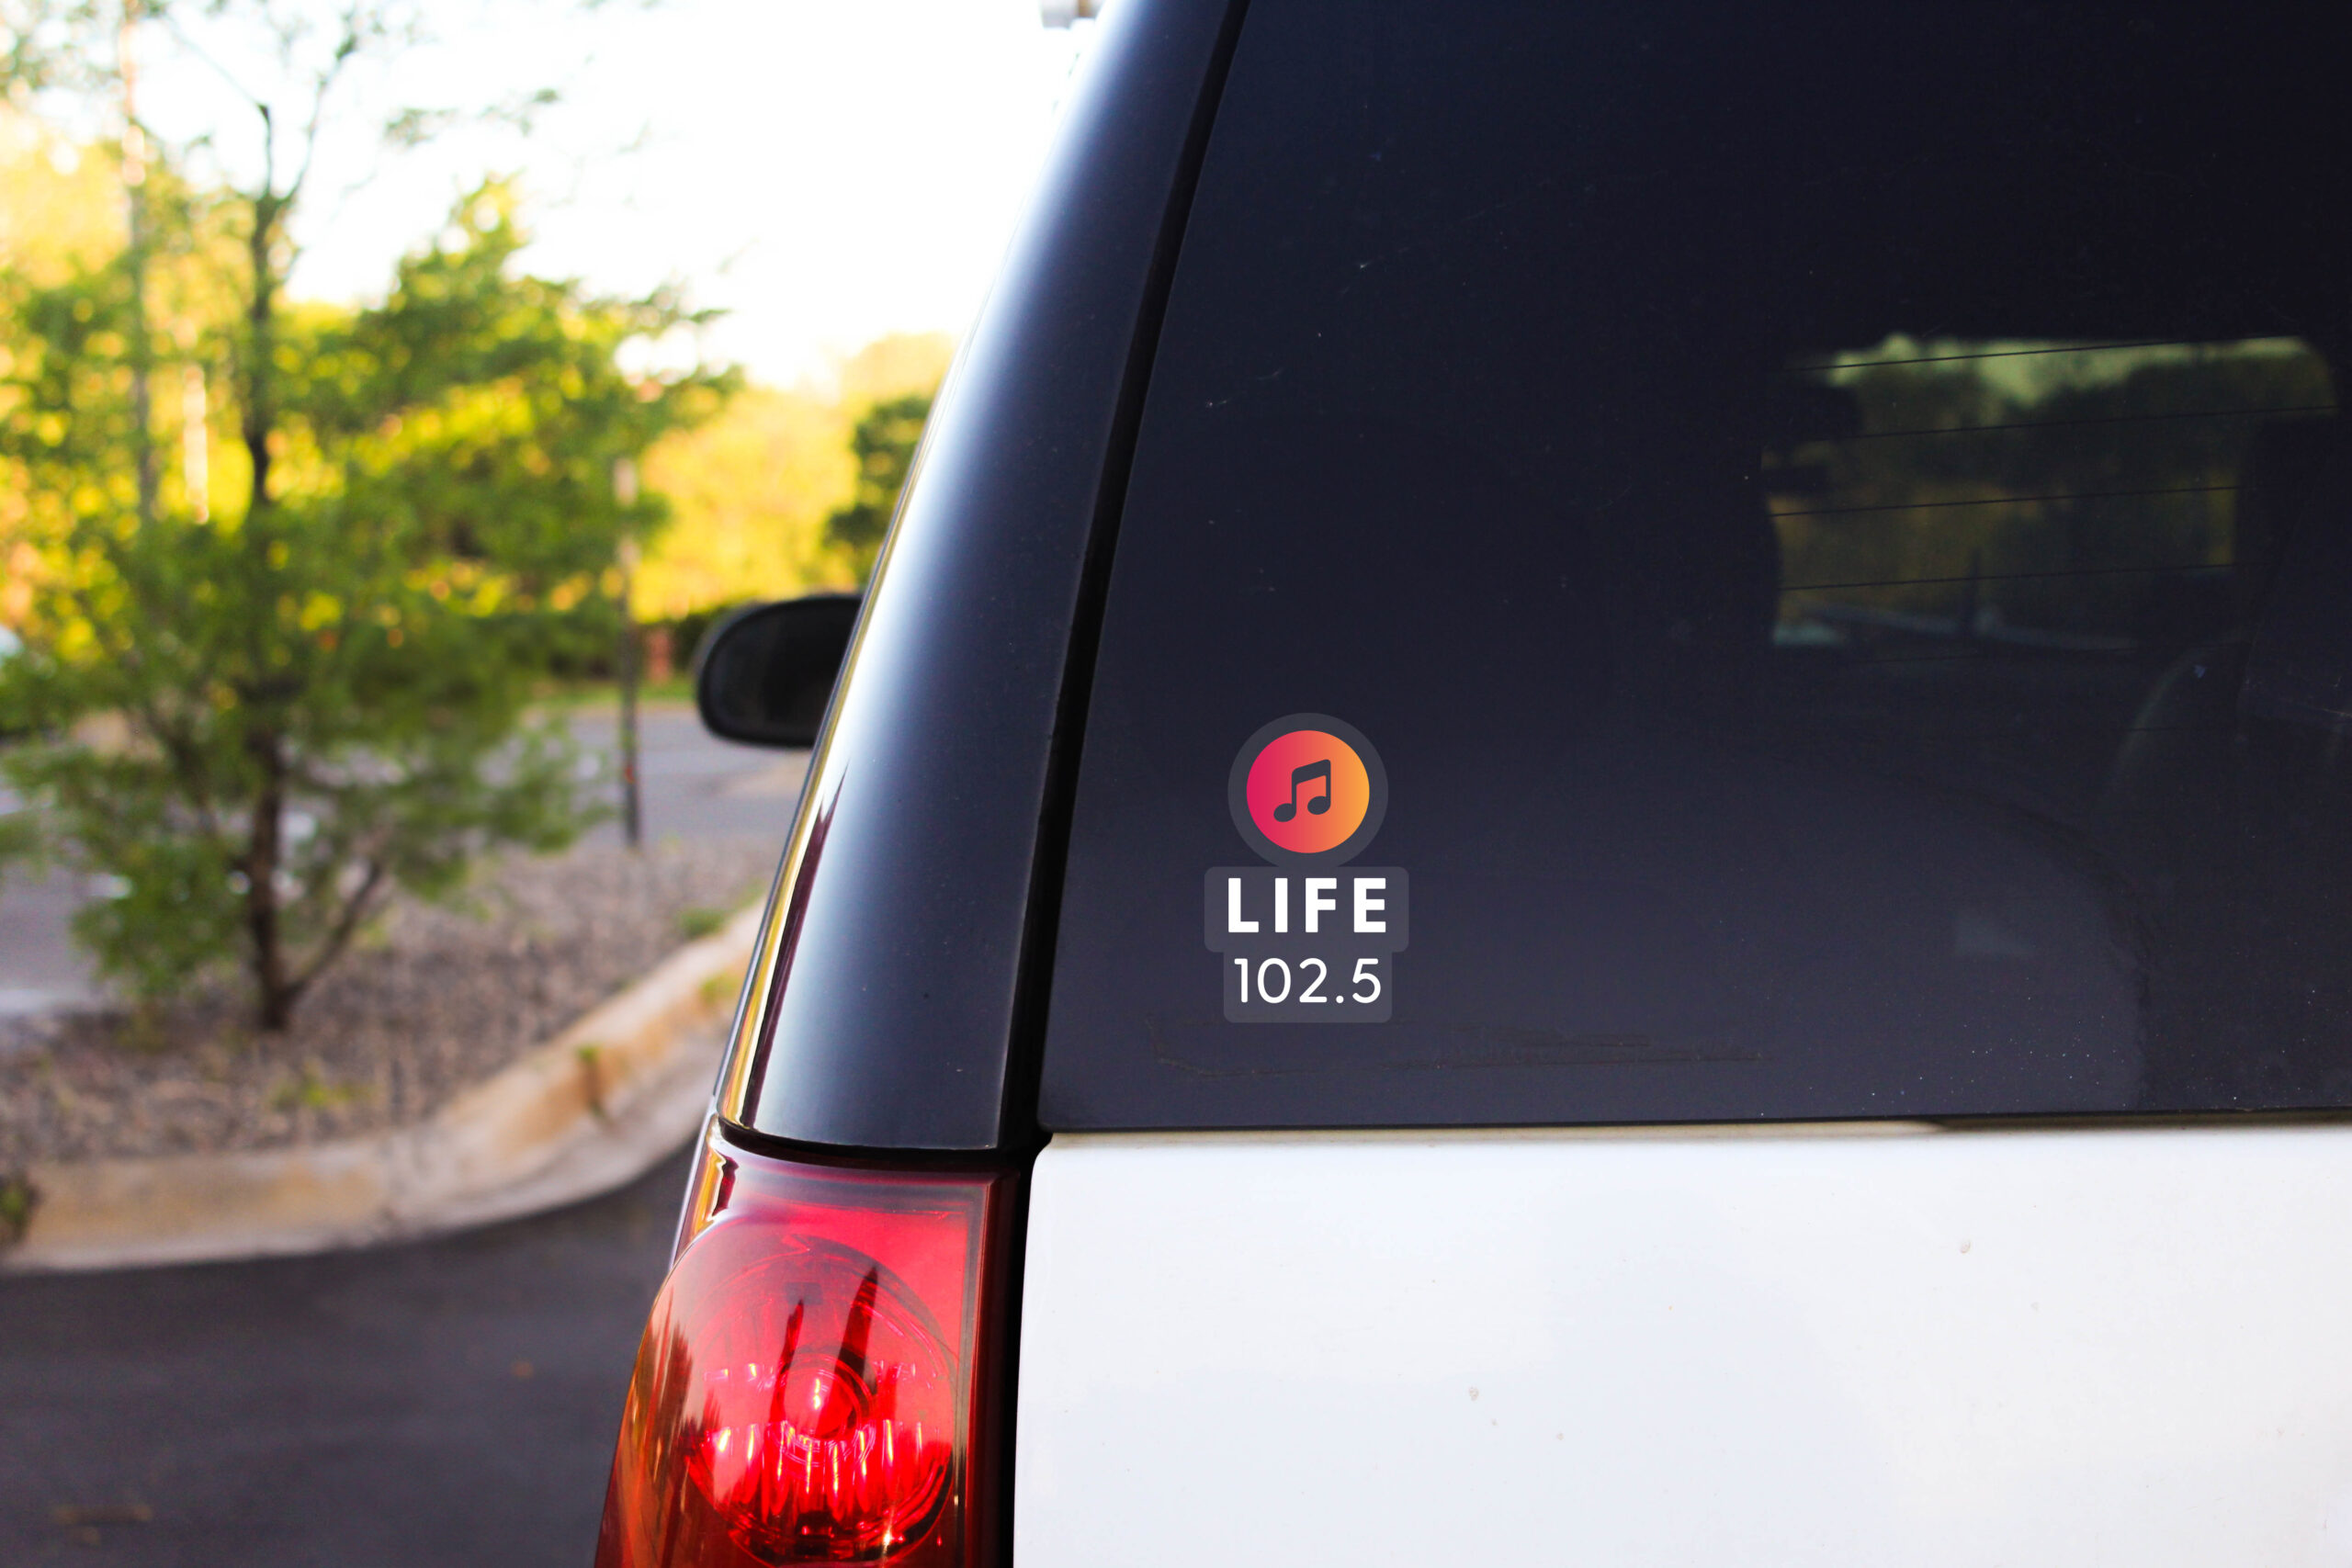 Life 102.5 sticker on the back of a car.